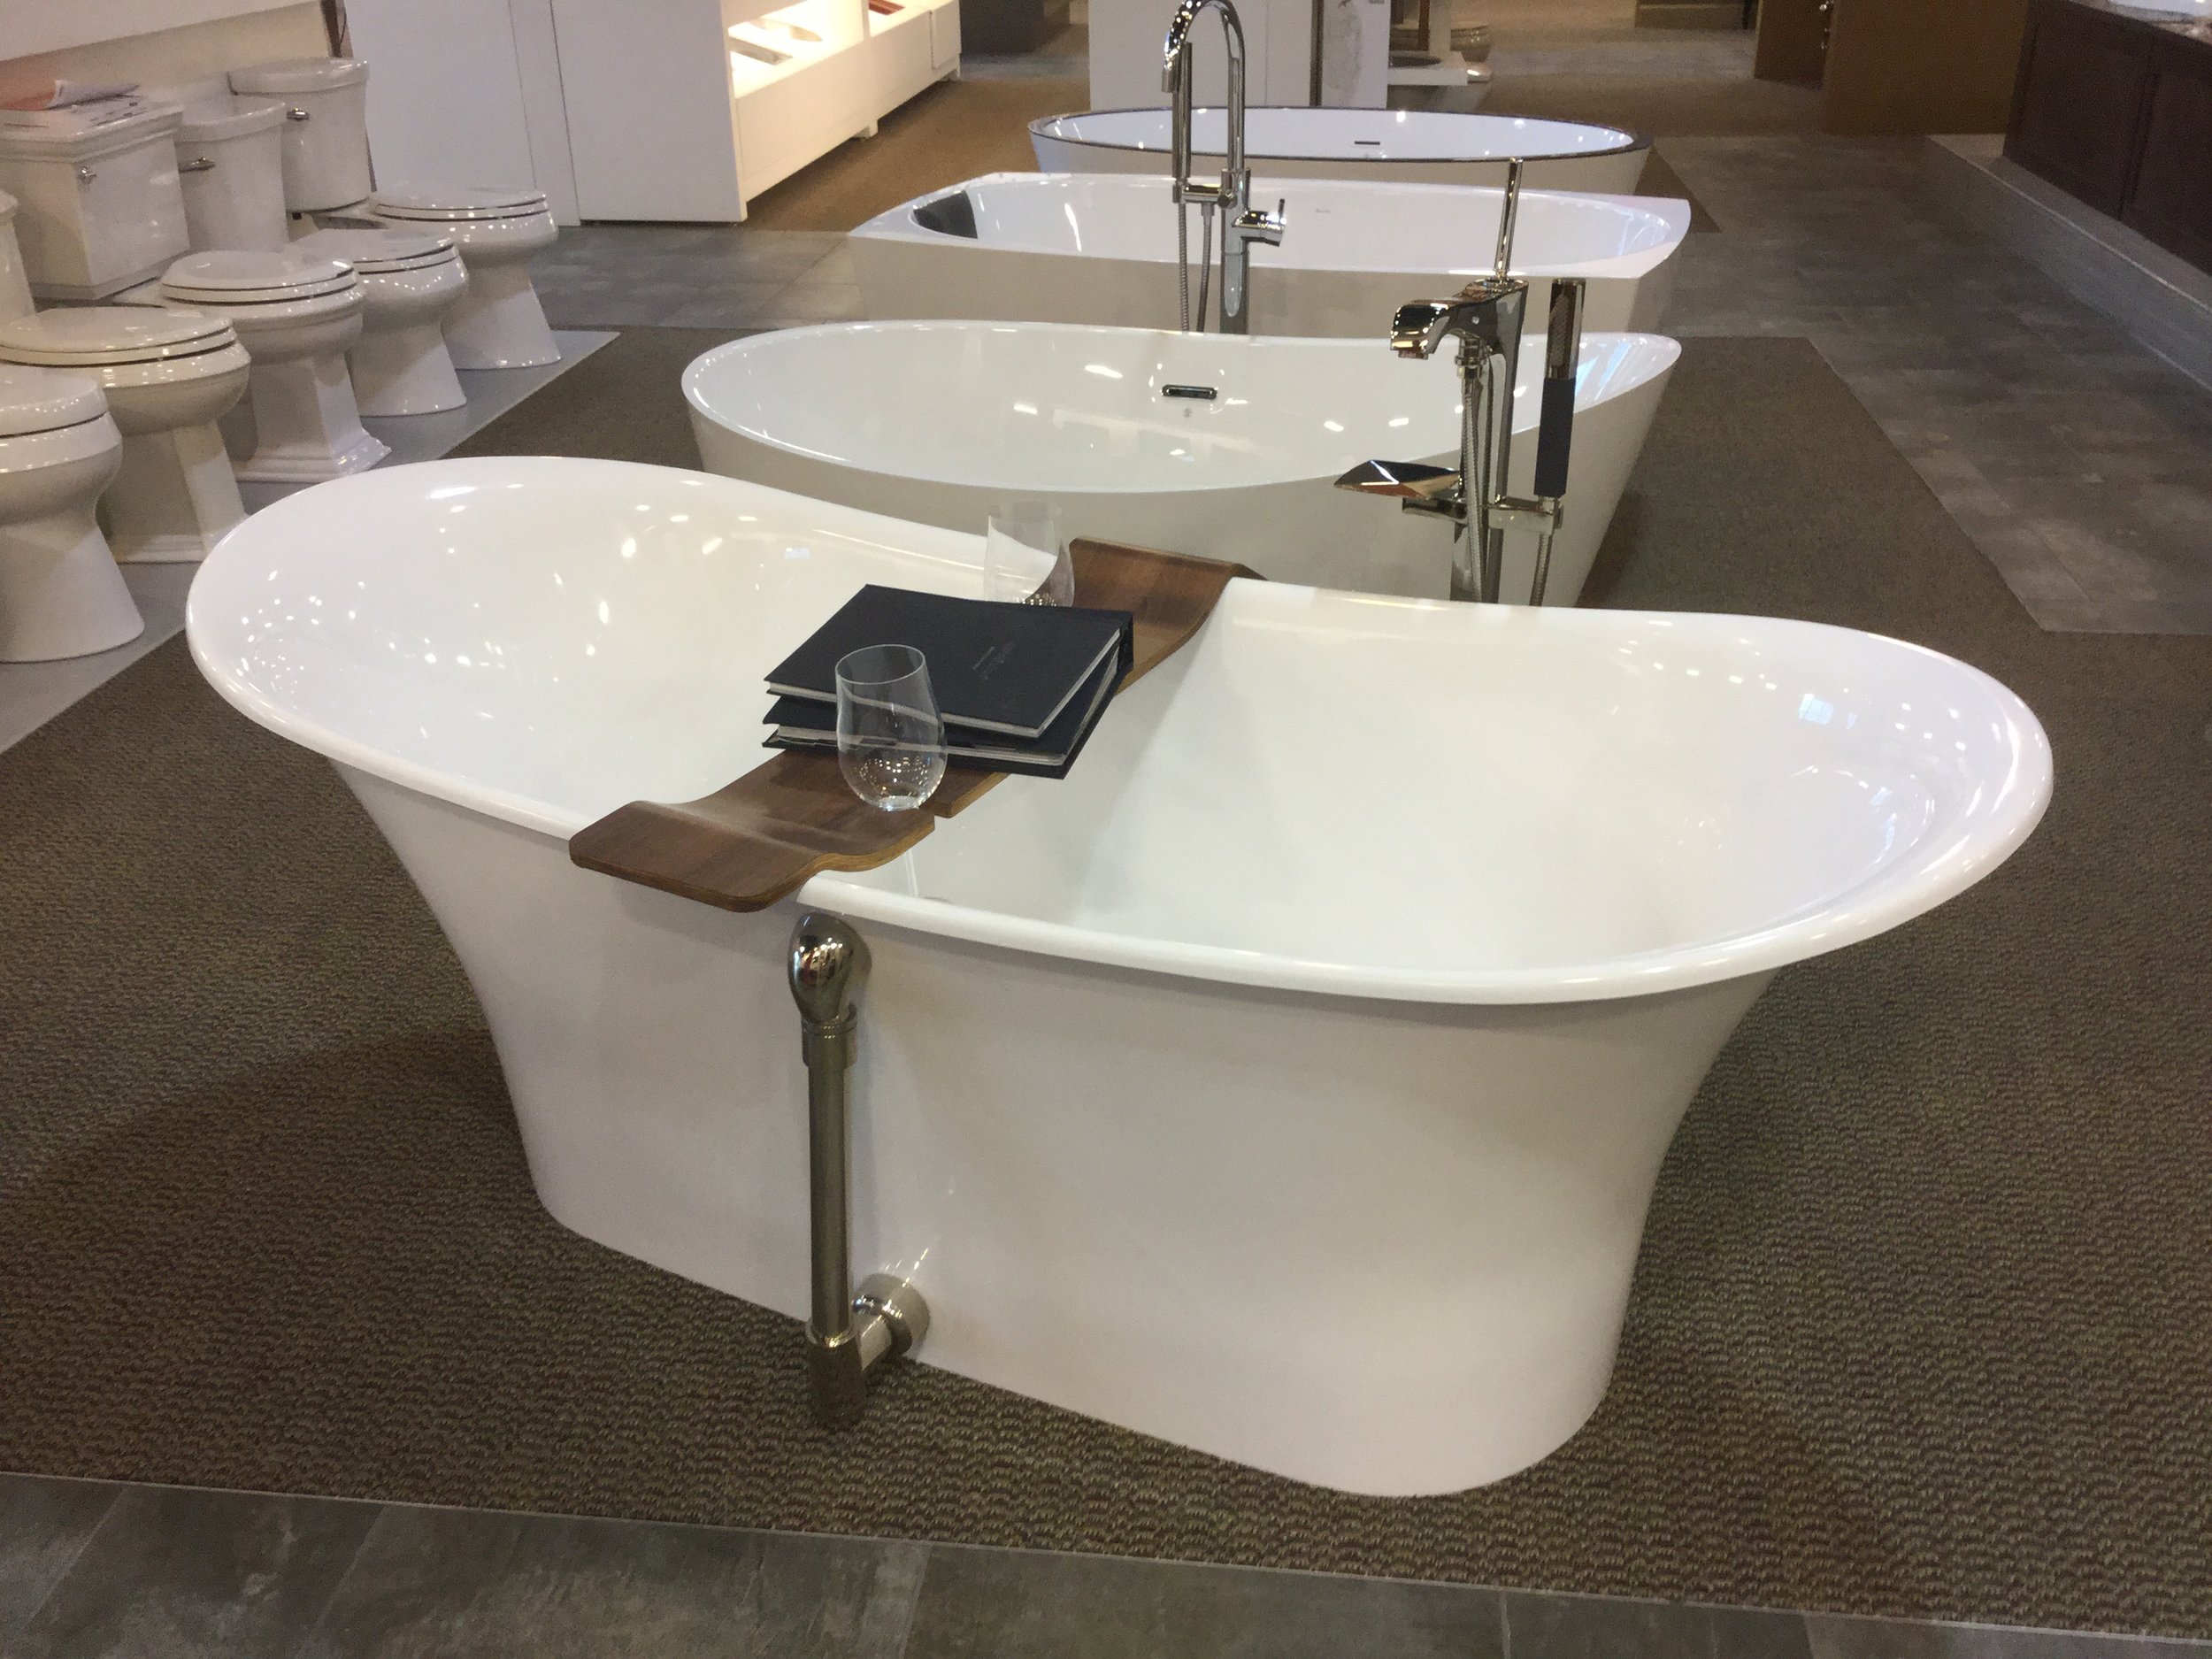 Kitchens and Baths by Briggs not only has top-notch customer service, but you can actually sit in these beauties.